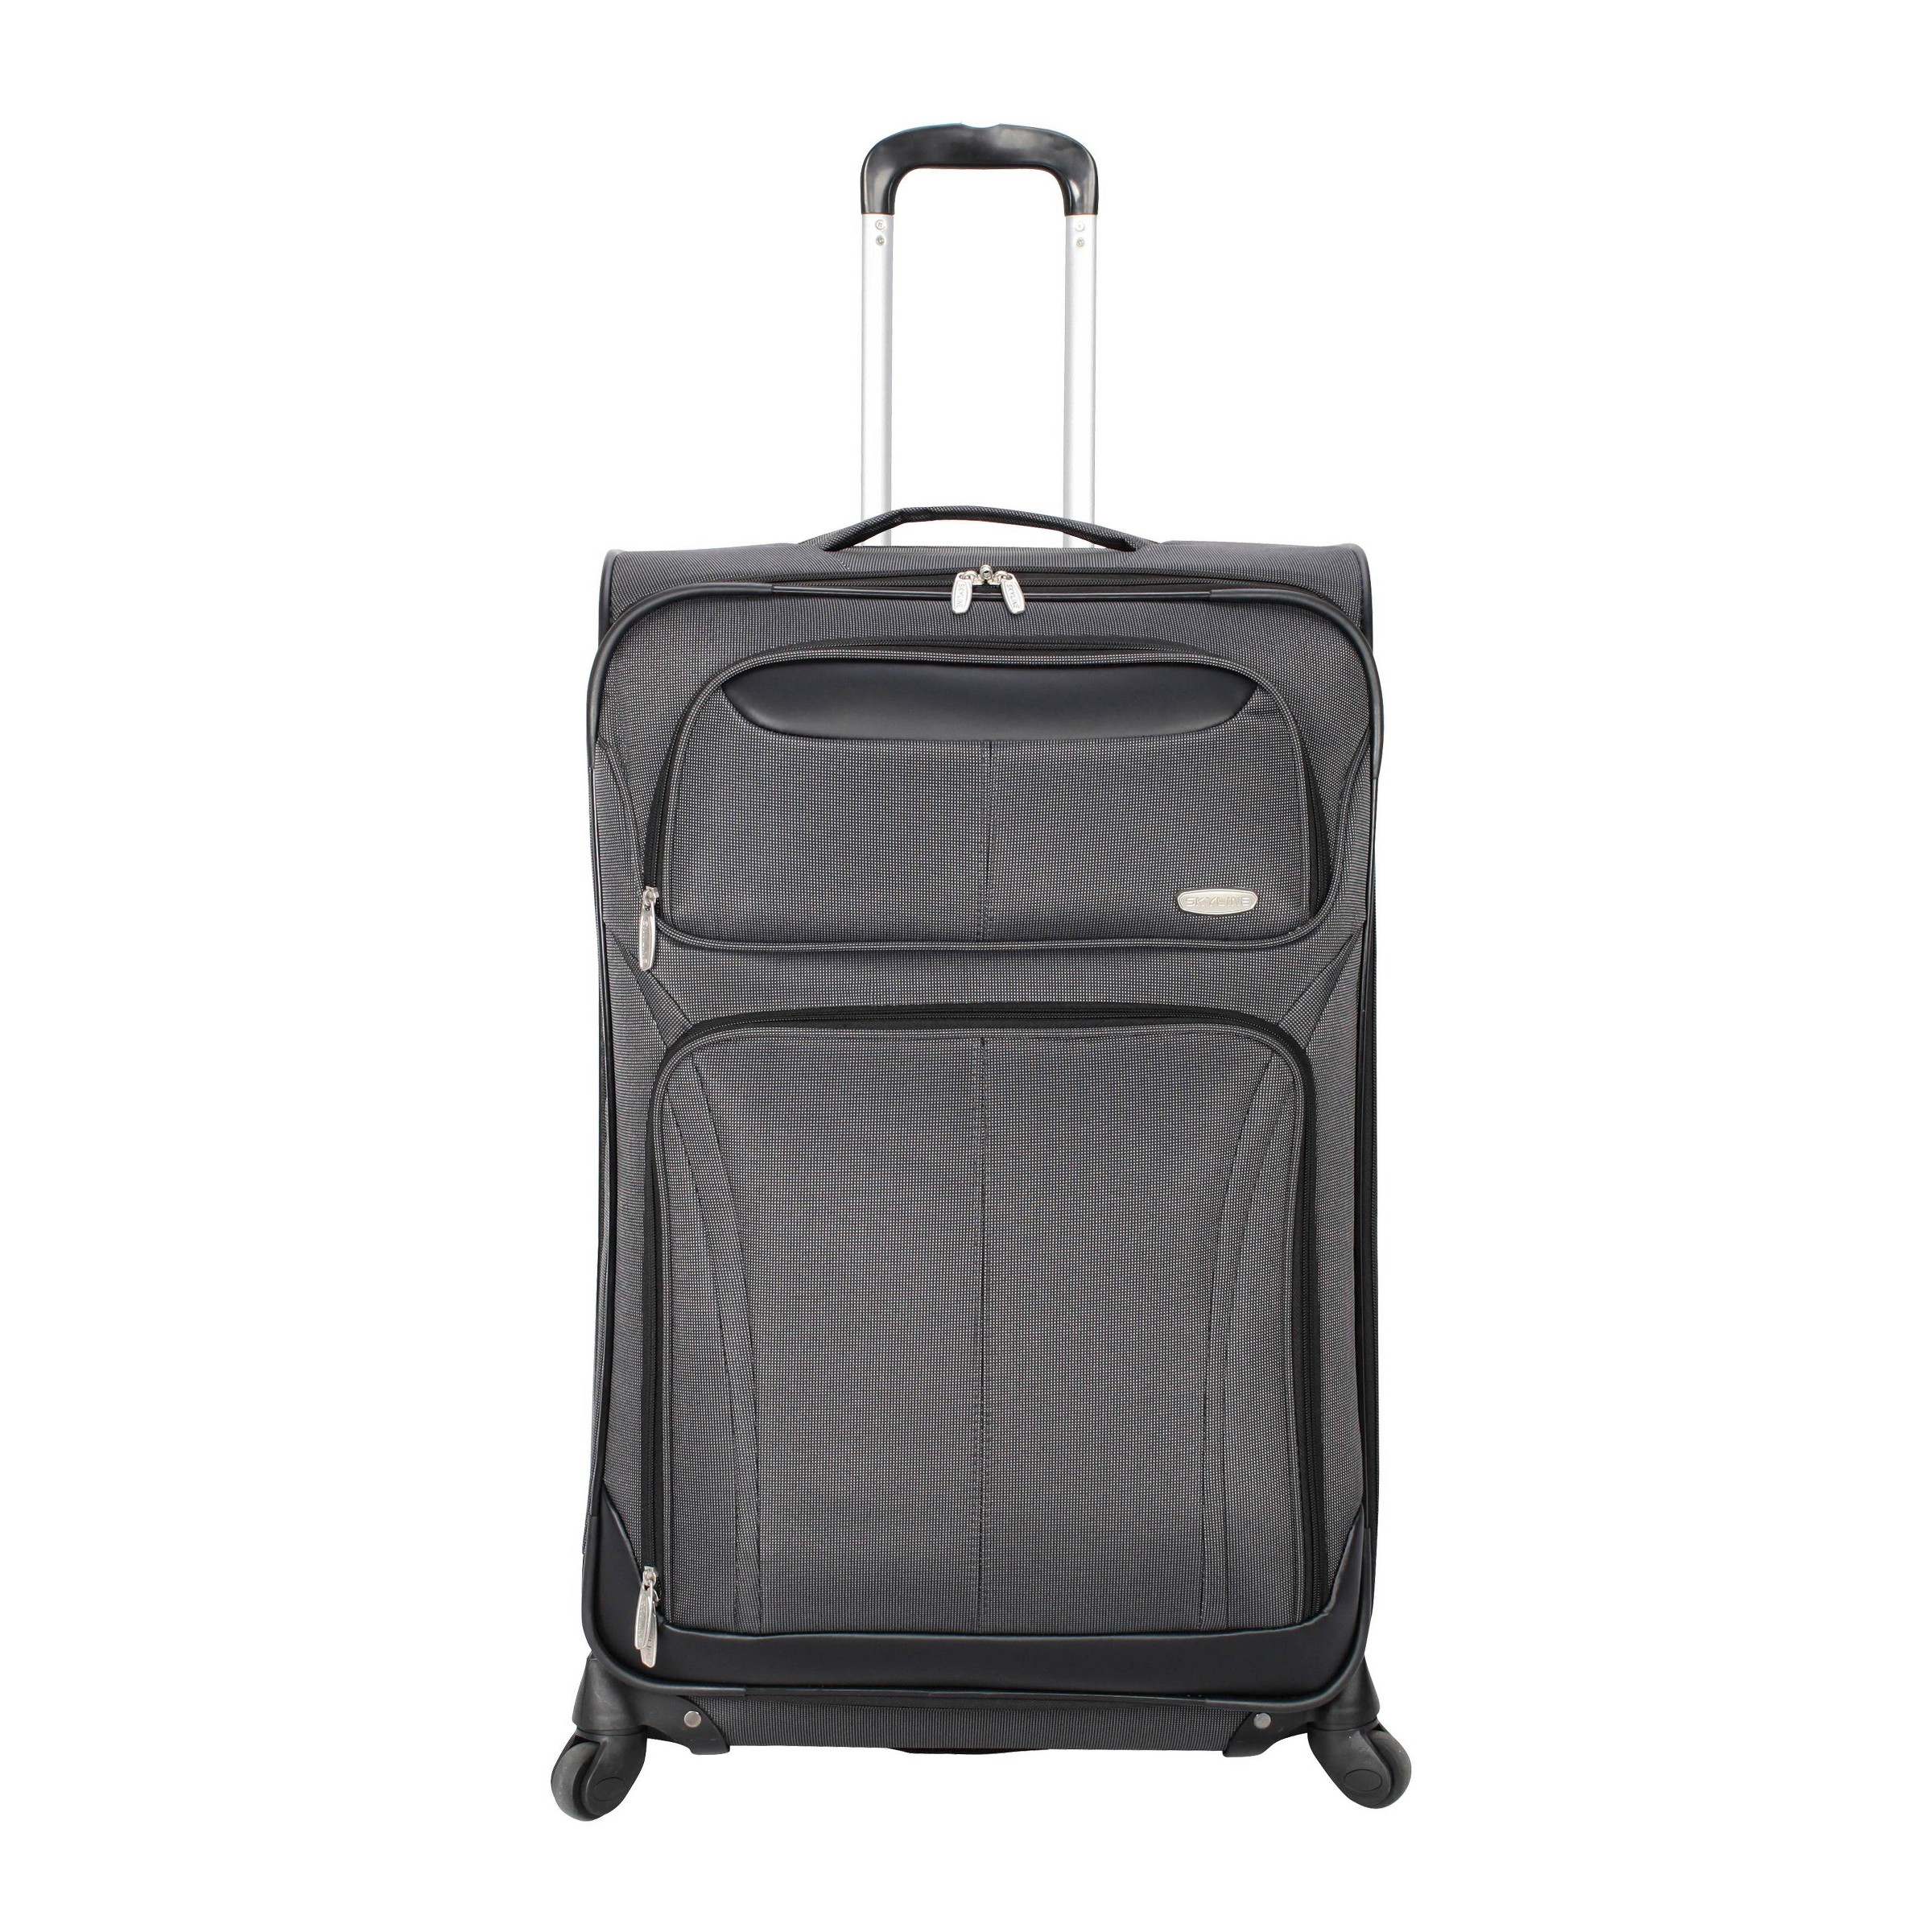 Skyline 21 Inch Softside Carry On Spinner Suitcase